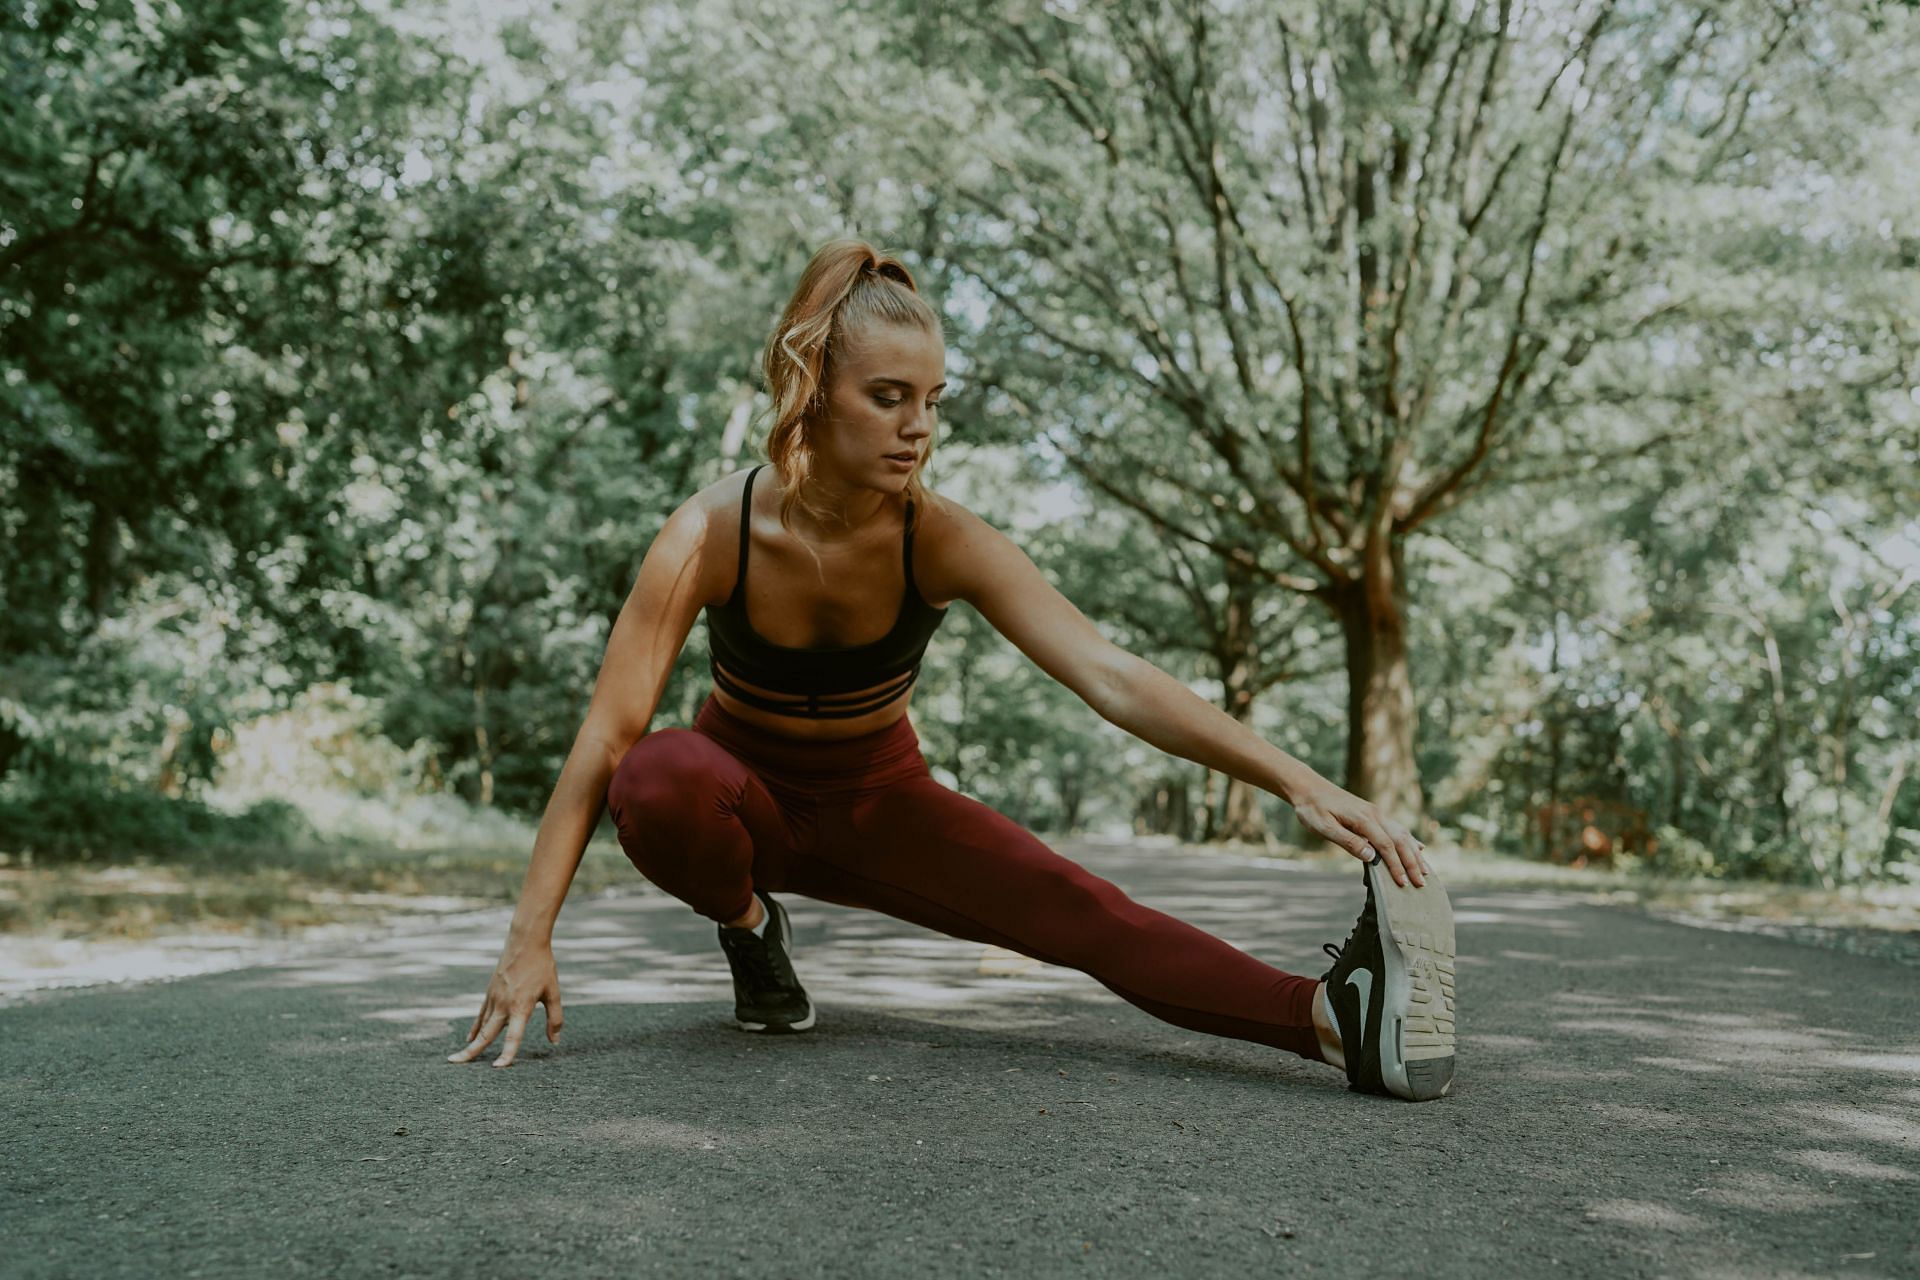 Best and effective bodyweight leg exercises for women to include in workout. (Image via Pexels/Dinielle De Veyra)